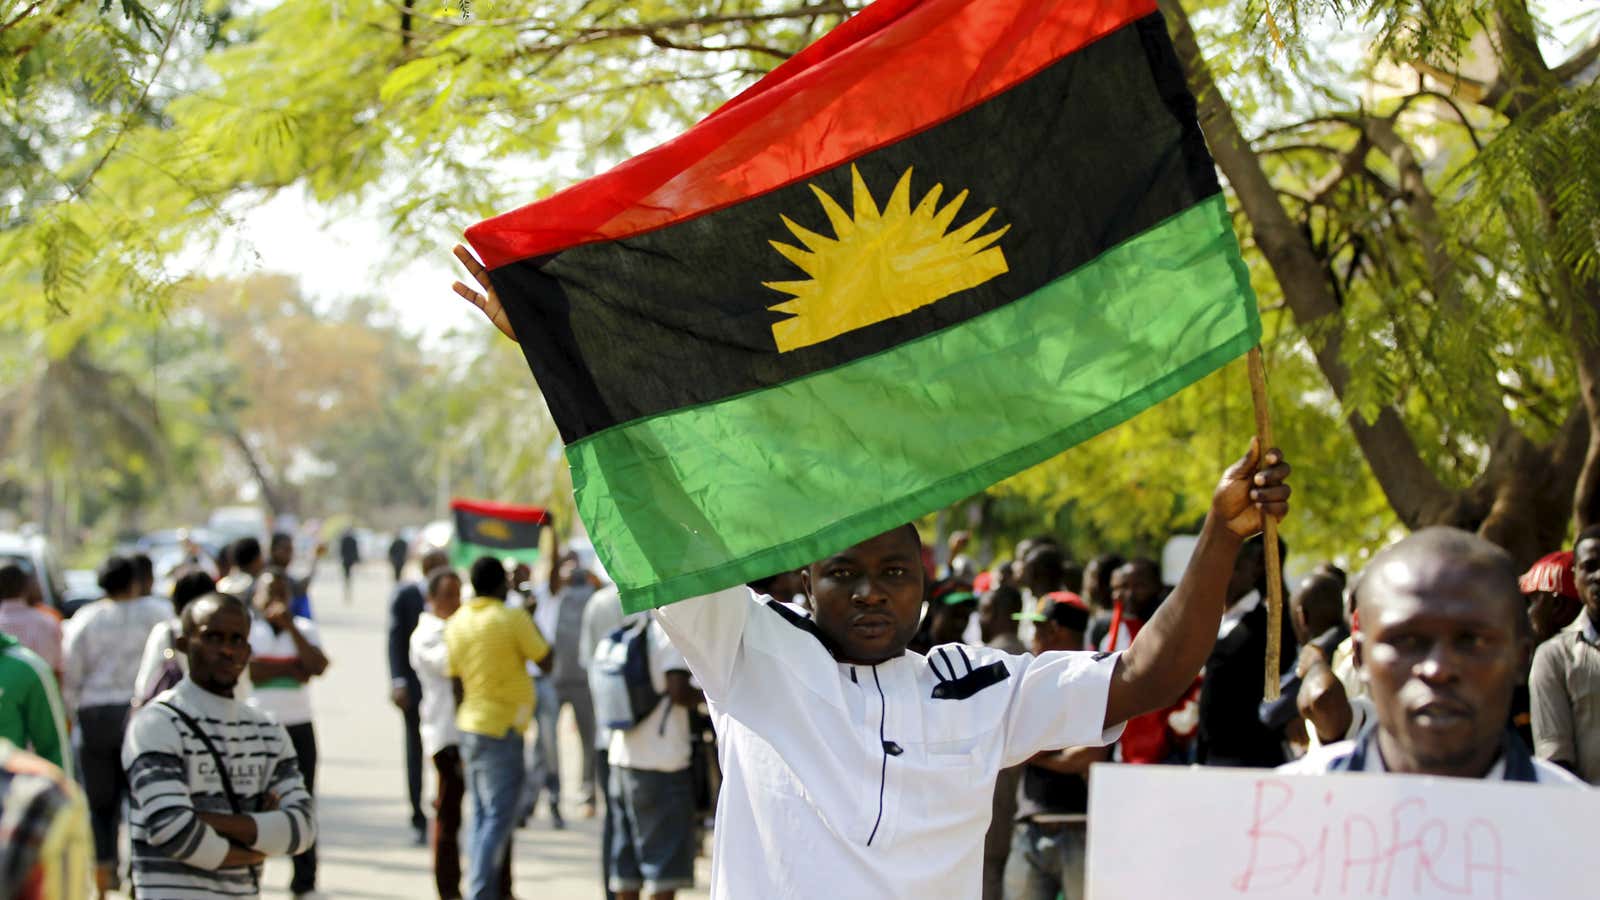 A supporter of Indigenous People of Biafra (IPOB) leader Nnamdi Kanu holds a Biafra flag during a rally in support of Kanu